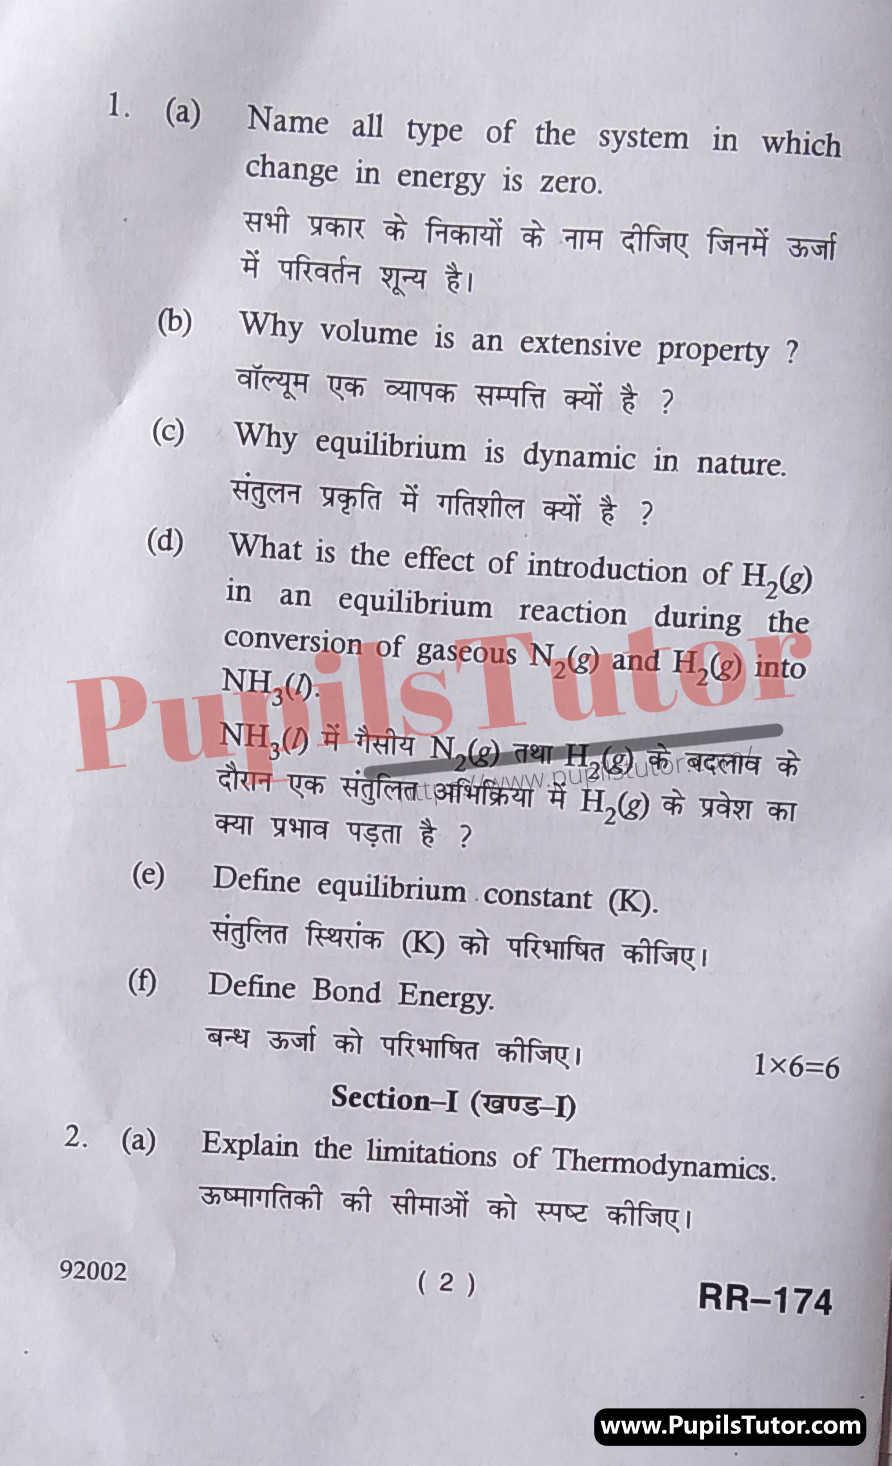 M.D. University B.Sc. [Chemistry] Physical Chemistry Third Semester Important Question Answer And Solution - www.pupilstutor.com (Paper Page Number 2)